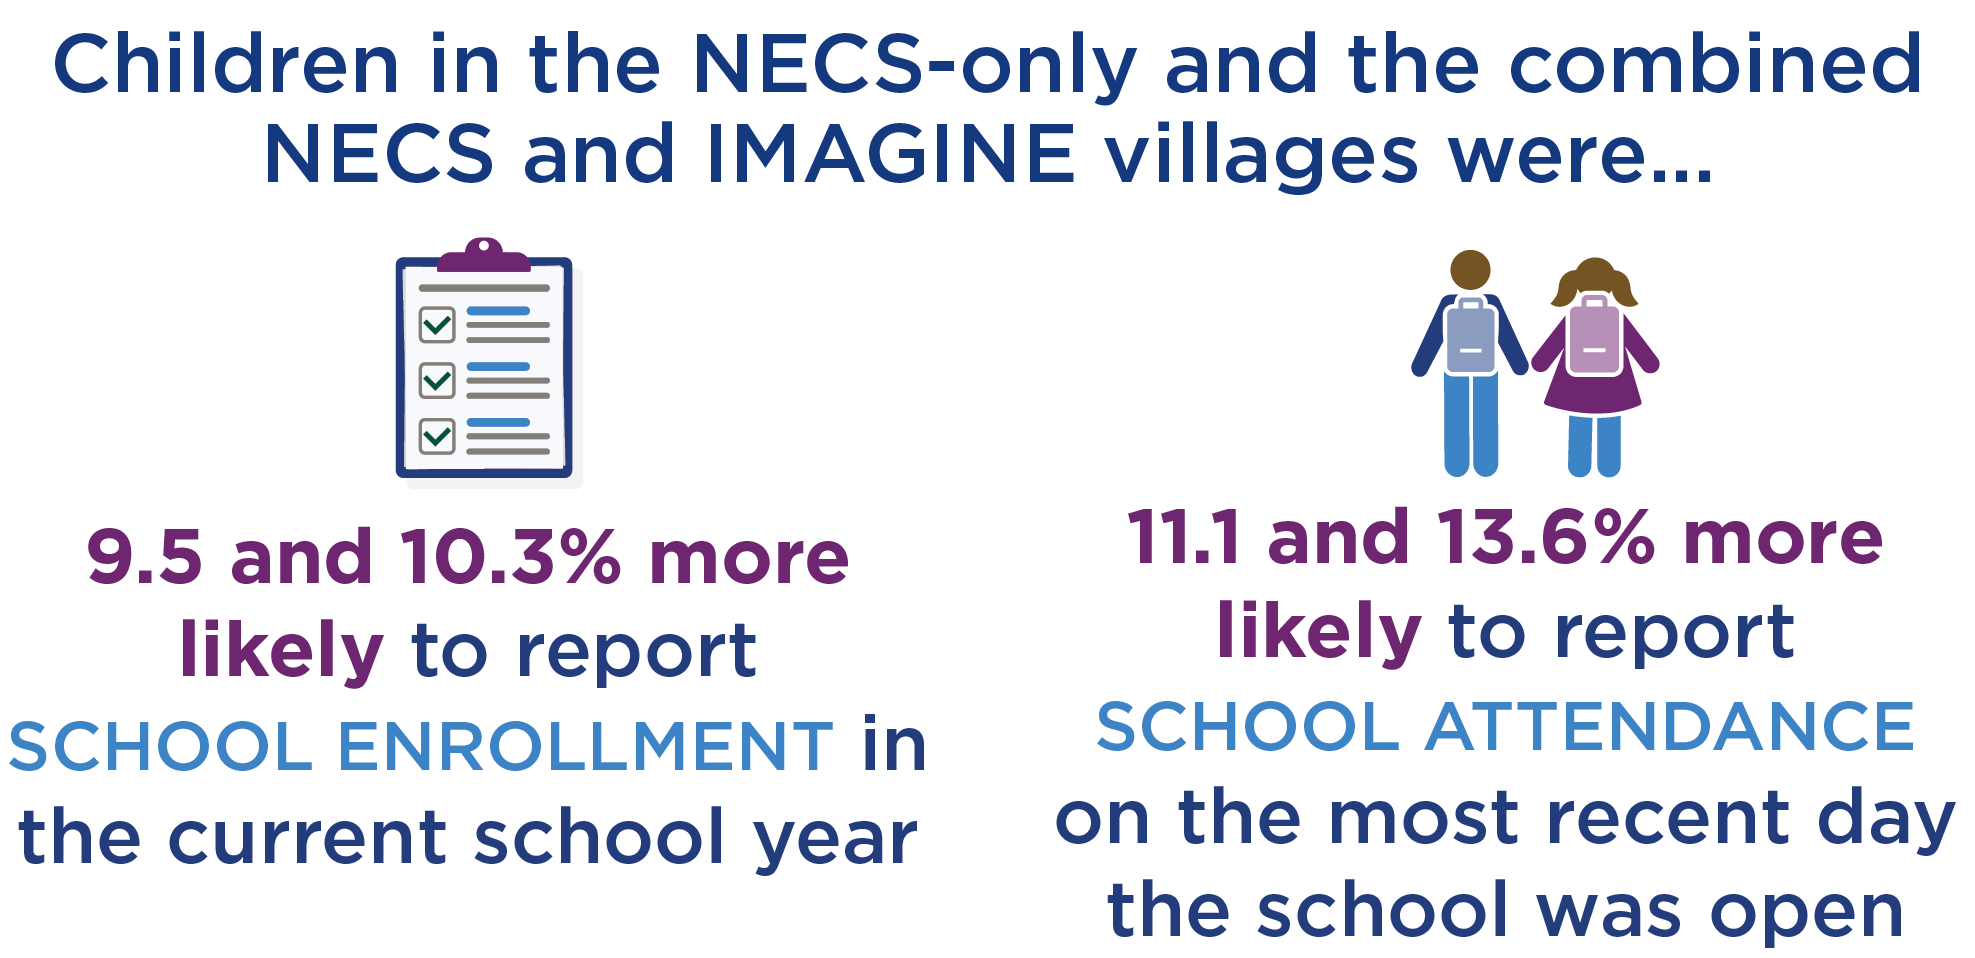 NECS-only and NECS and IMAGINE villages had increased enrollment and attendance